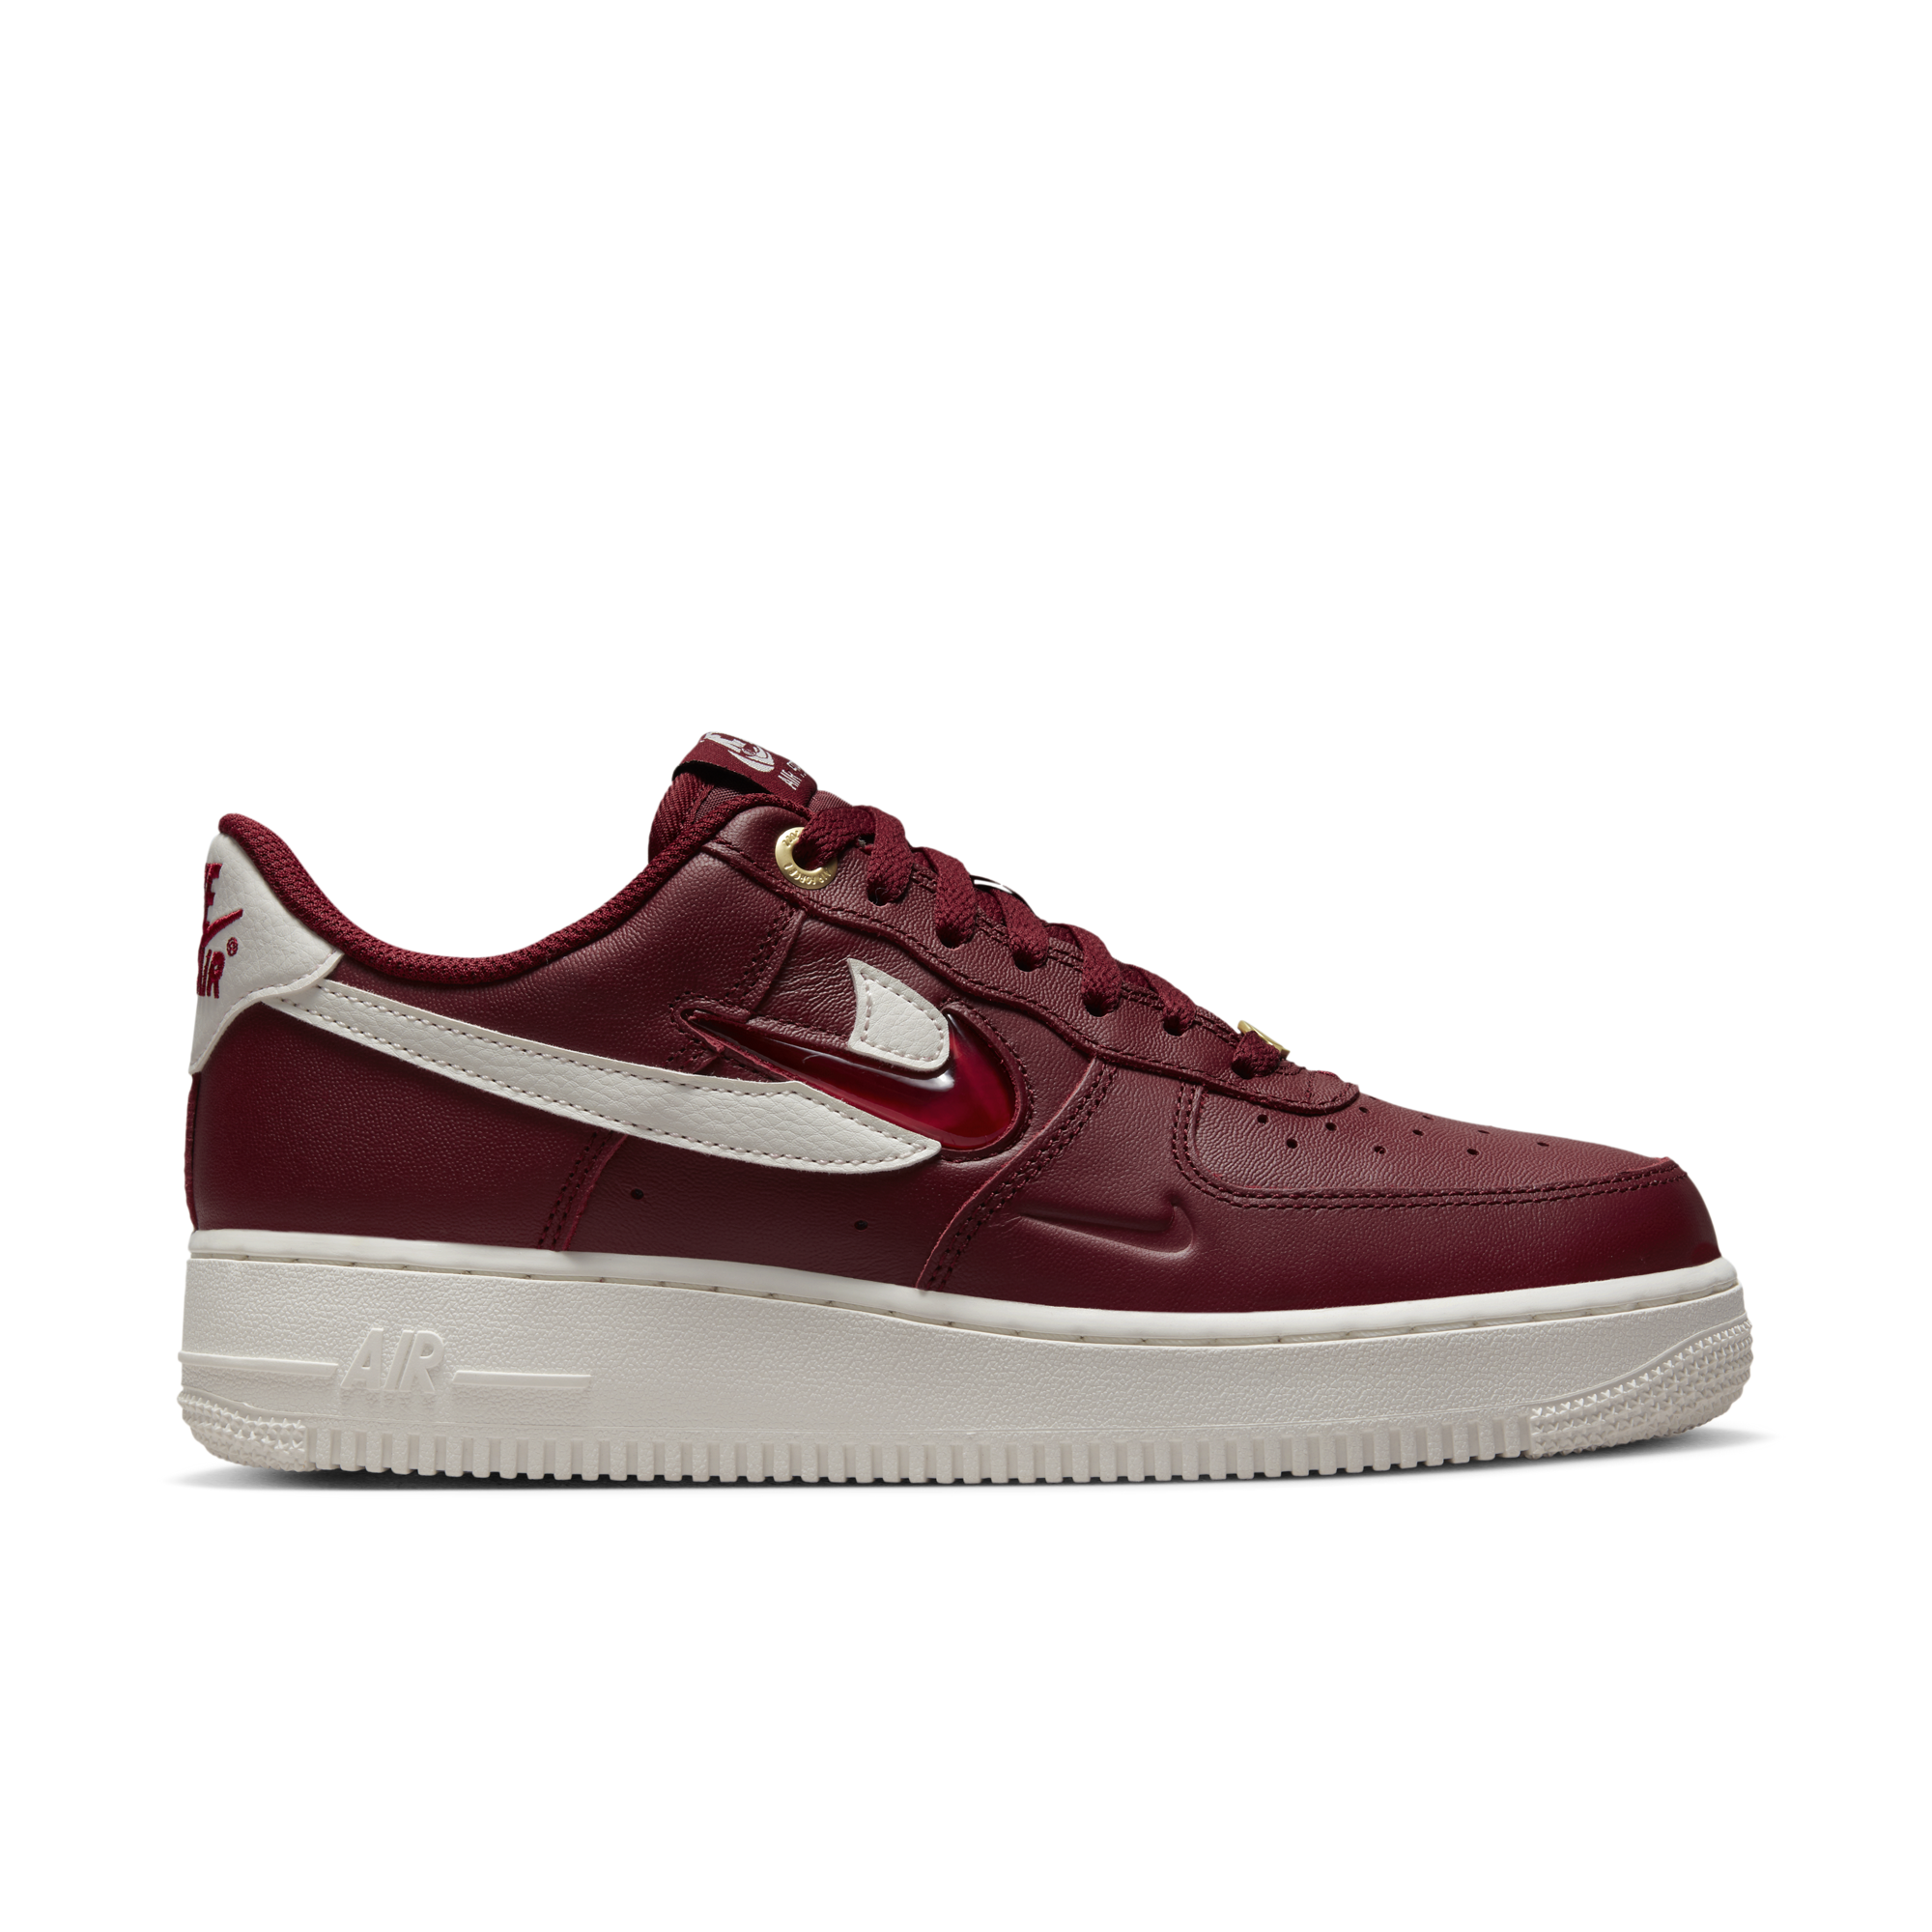 Nike Wmns Air Force 1 07 Essential White Gym Red - Size 11 Women